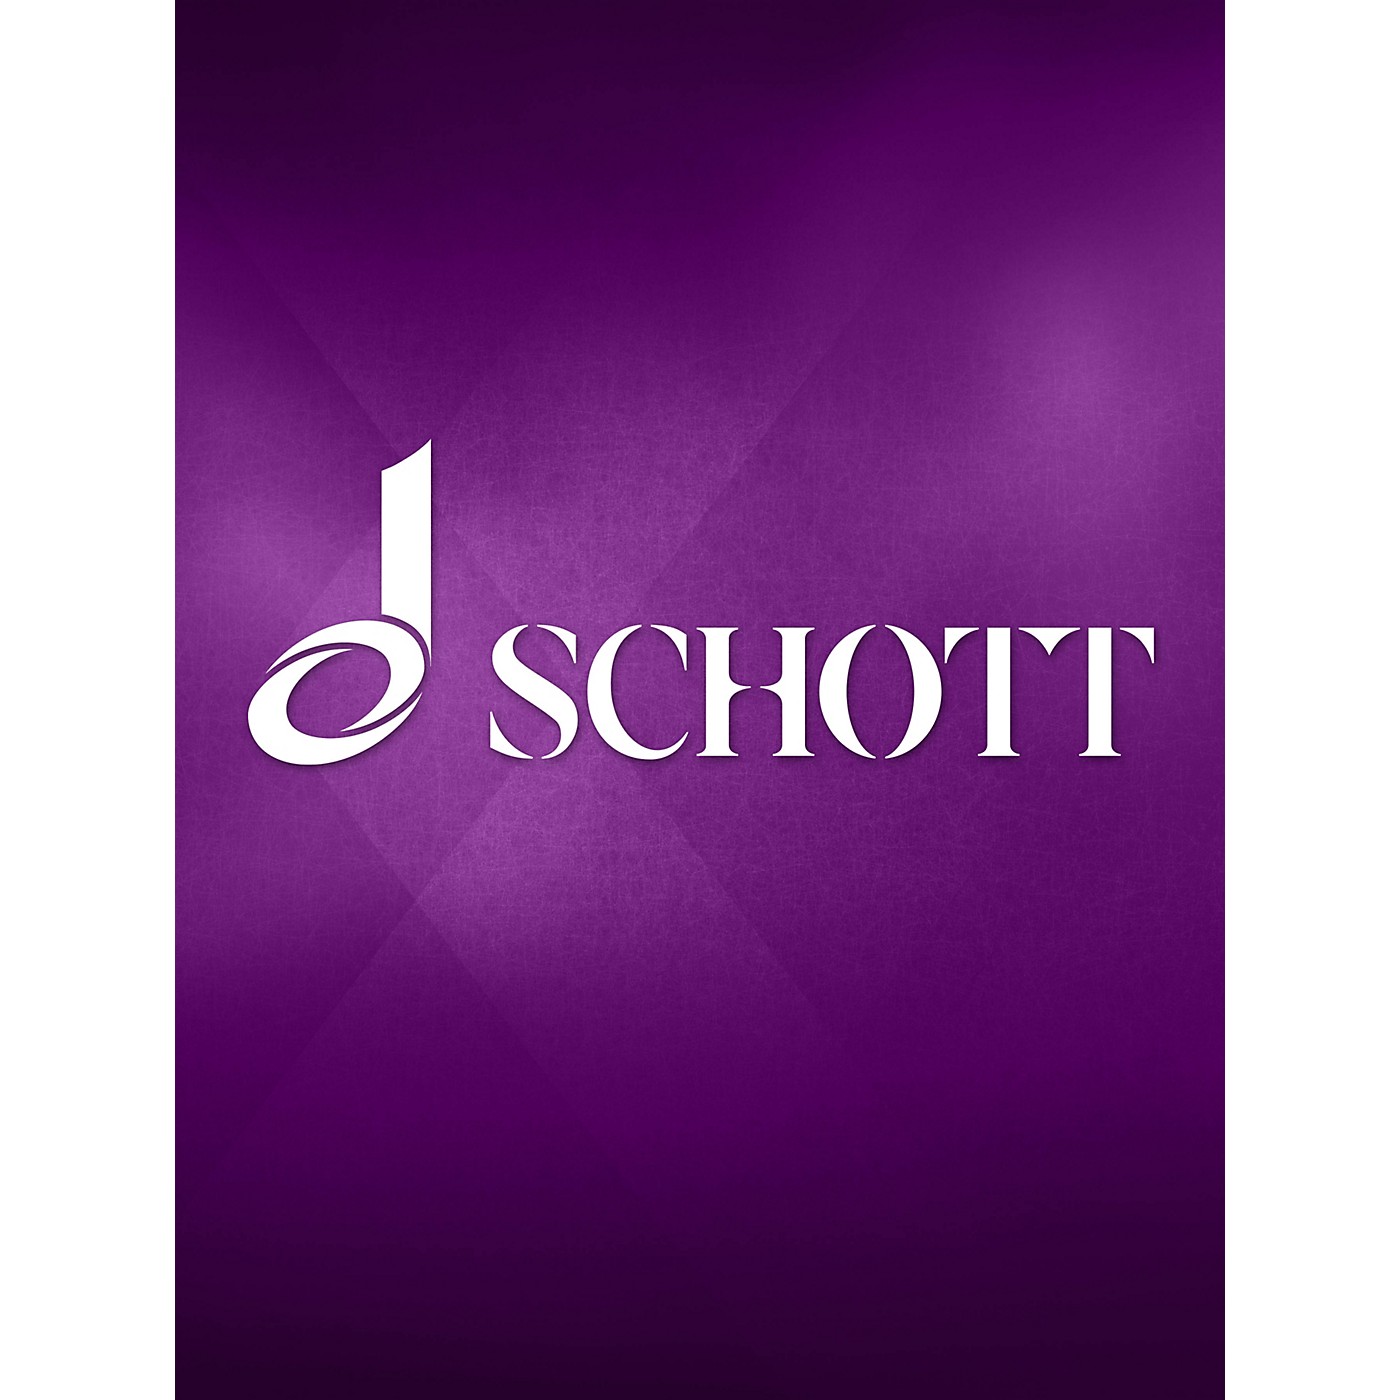 Schott Classical Pieces for the Beginner - Volume 1 (Violoncello and Piano) Schott Series thumbnail